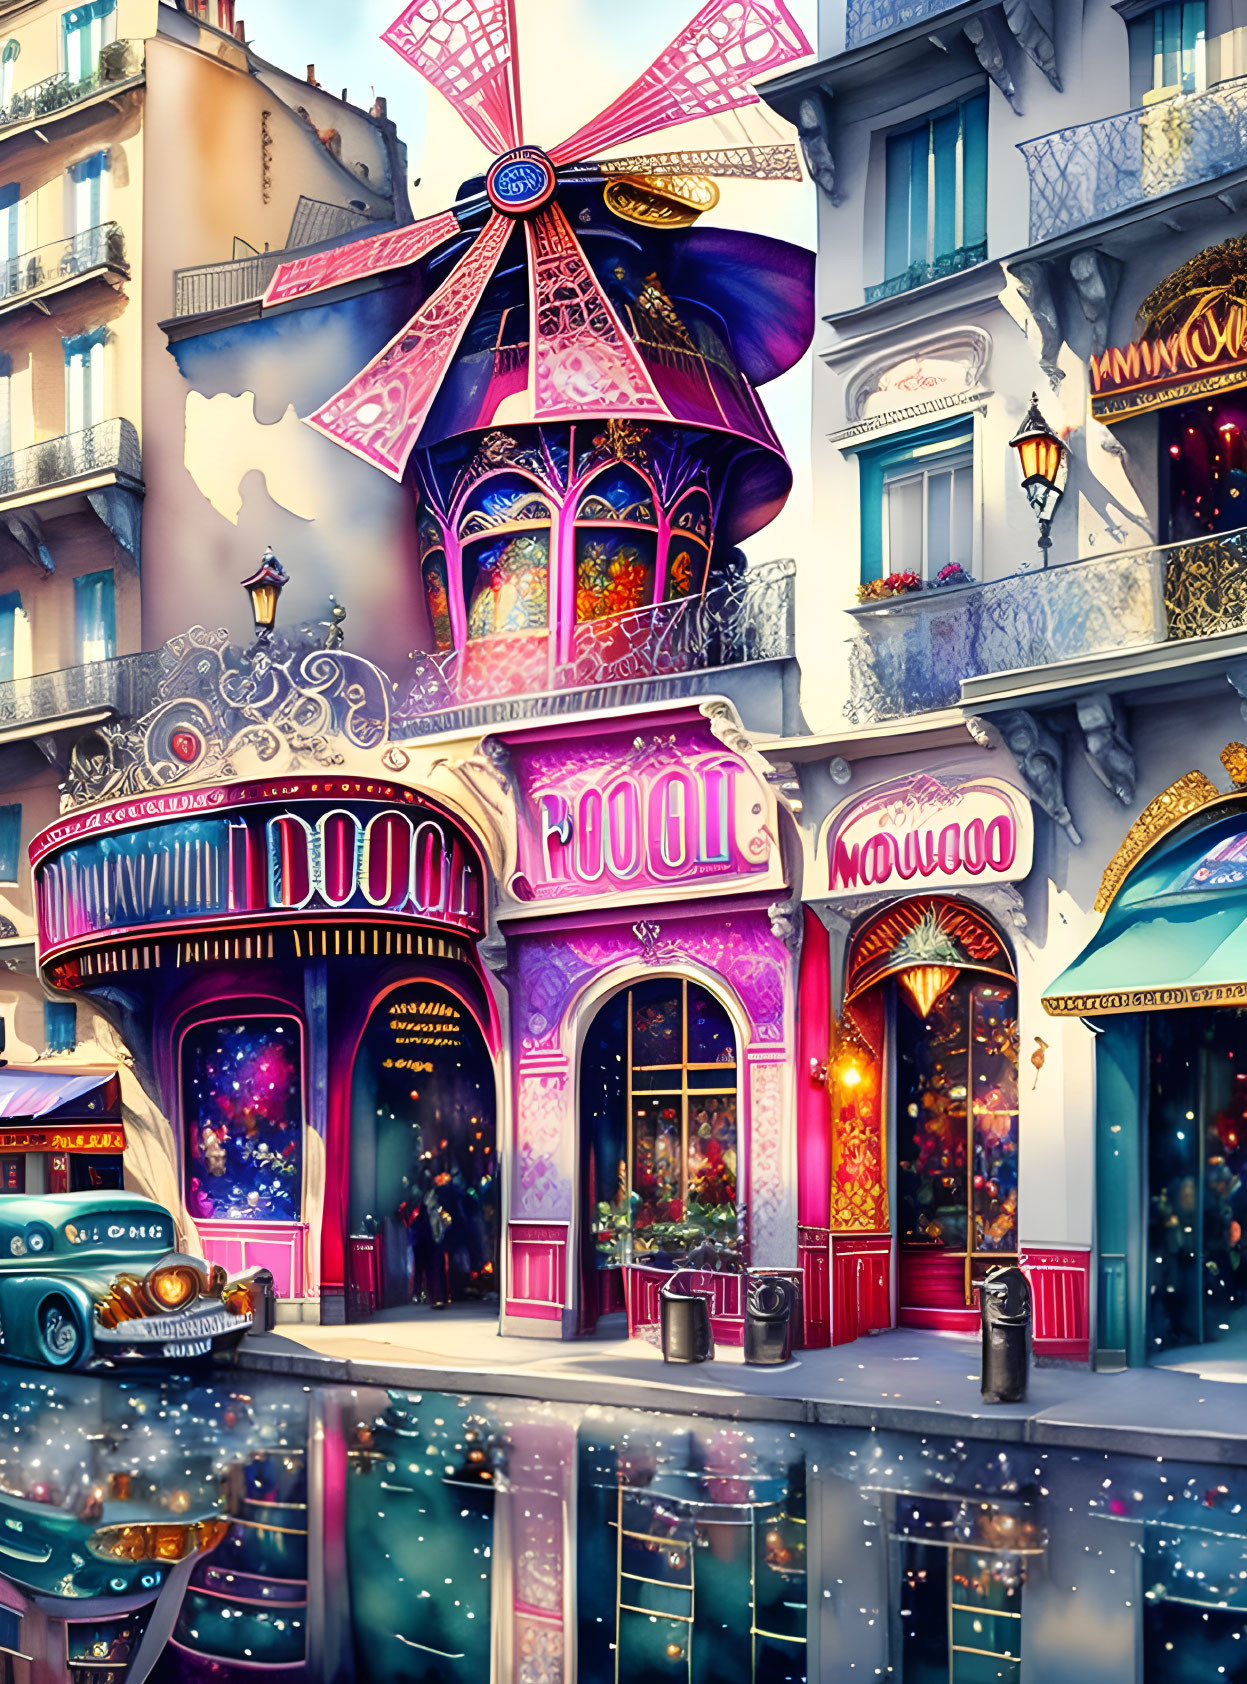 Whimsical Parisian street with Moulin Rouge windmill, vintage car, and glowing store fronts